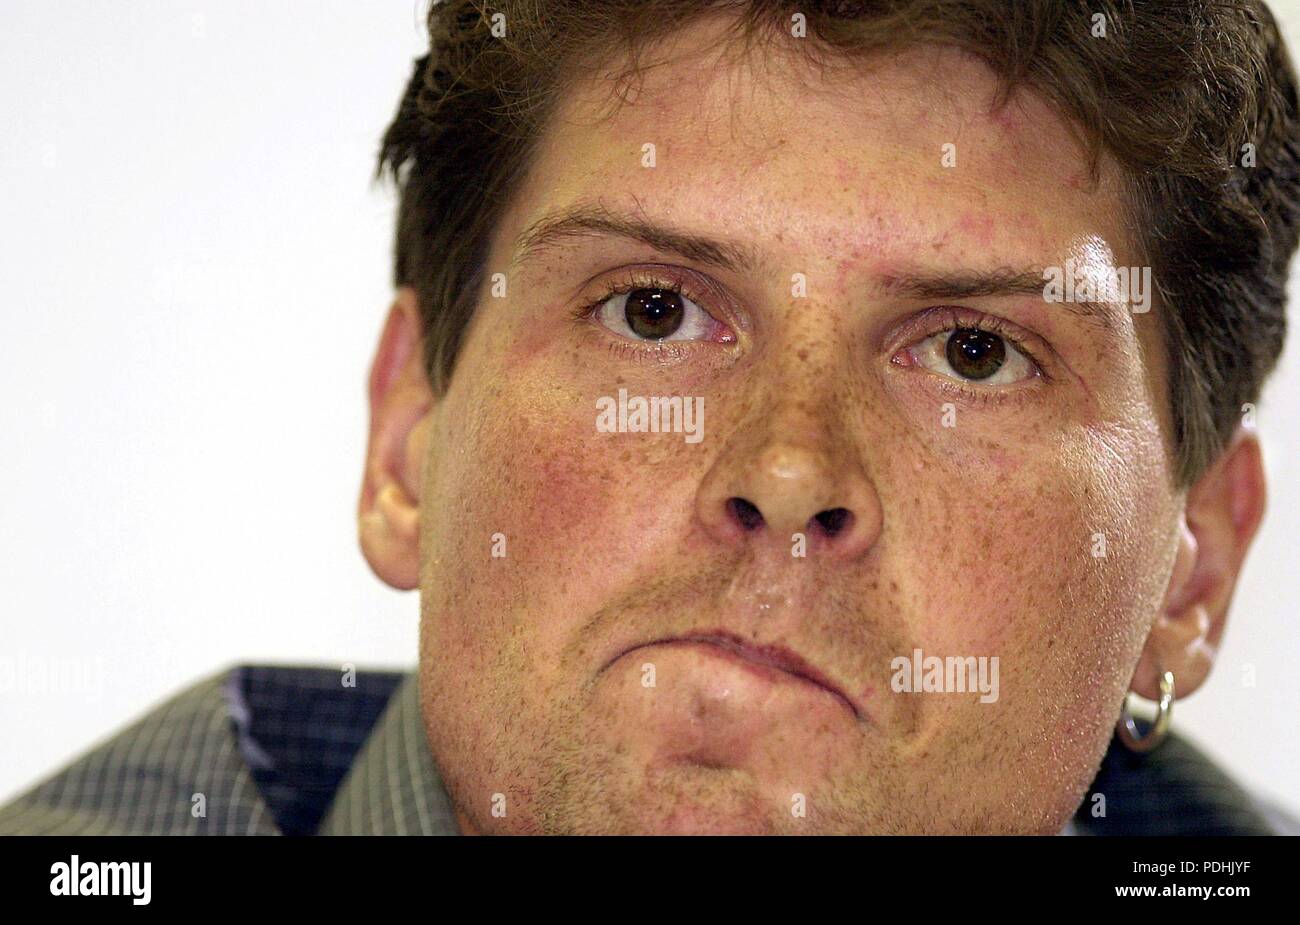 Frankfurt, Germany. 6th July, 2002. (dpa) - German cyclist Jan Ullrich of team Telekom grimaces during a press conference in Frankfurt, Germany, 6 July 2002. Germany's 1997 Tour de France champion Jan Ullrich admitted that he had taken recreational drugs on a night out with friends in June because he was depressed about a knee operation which did not resolve a long standing injury. | usage worldwide Credit: dpa/Alamy Live News Stock Photo